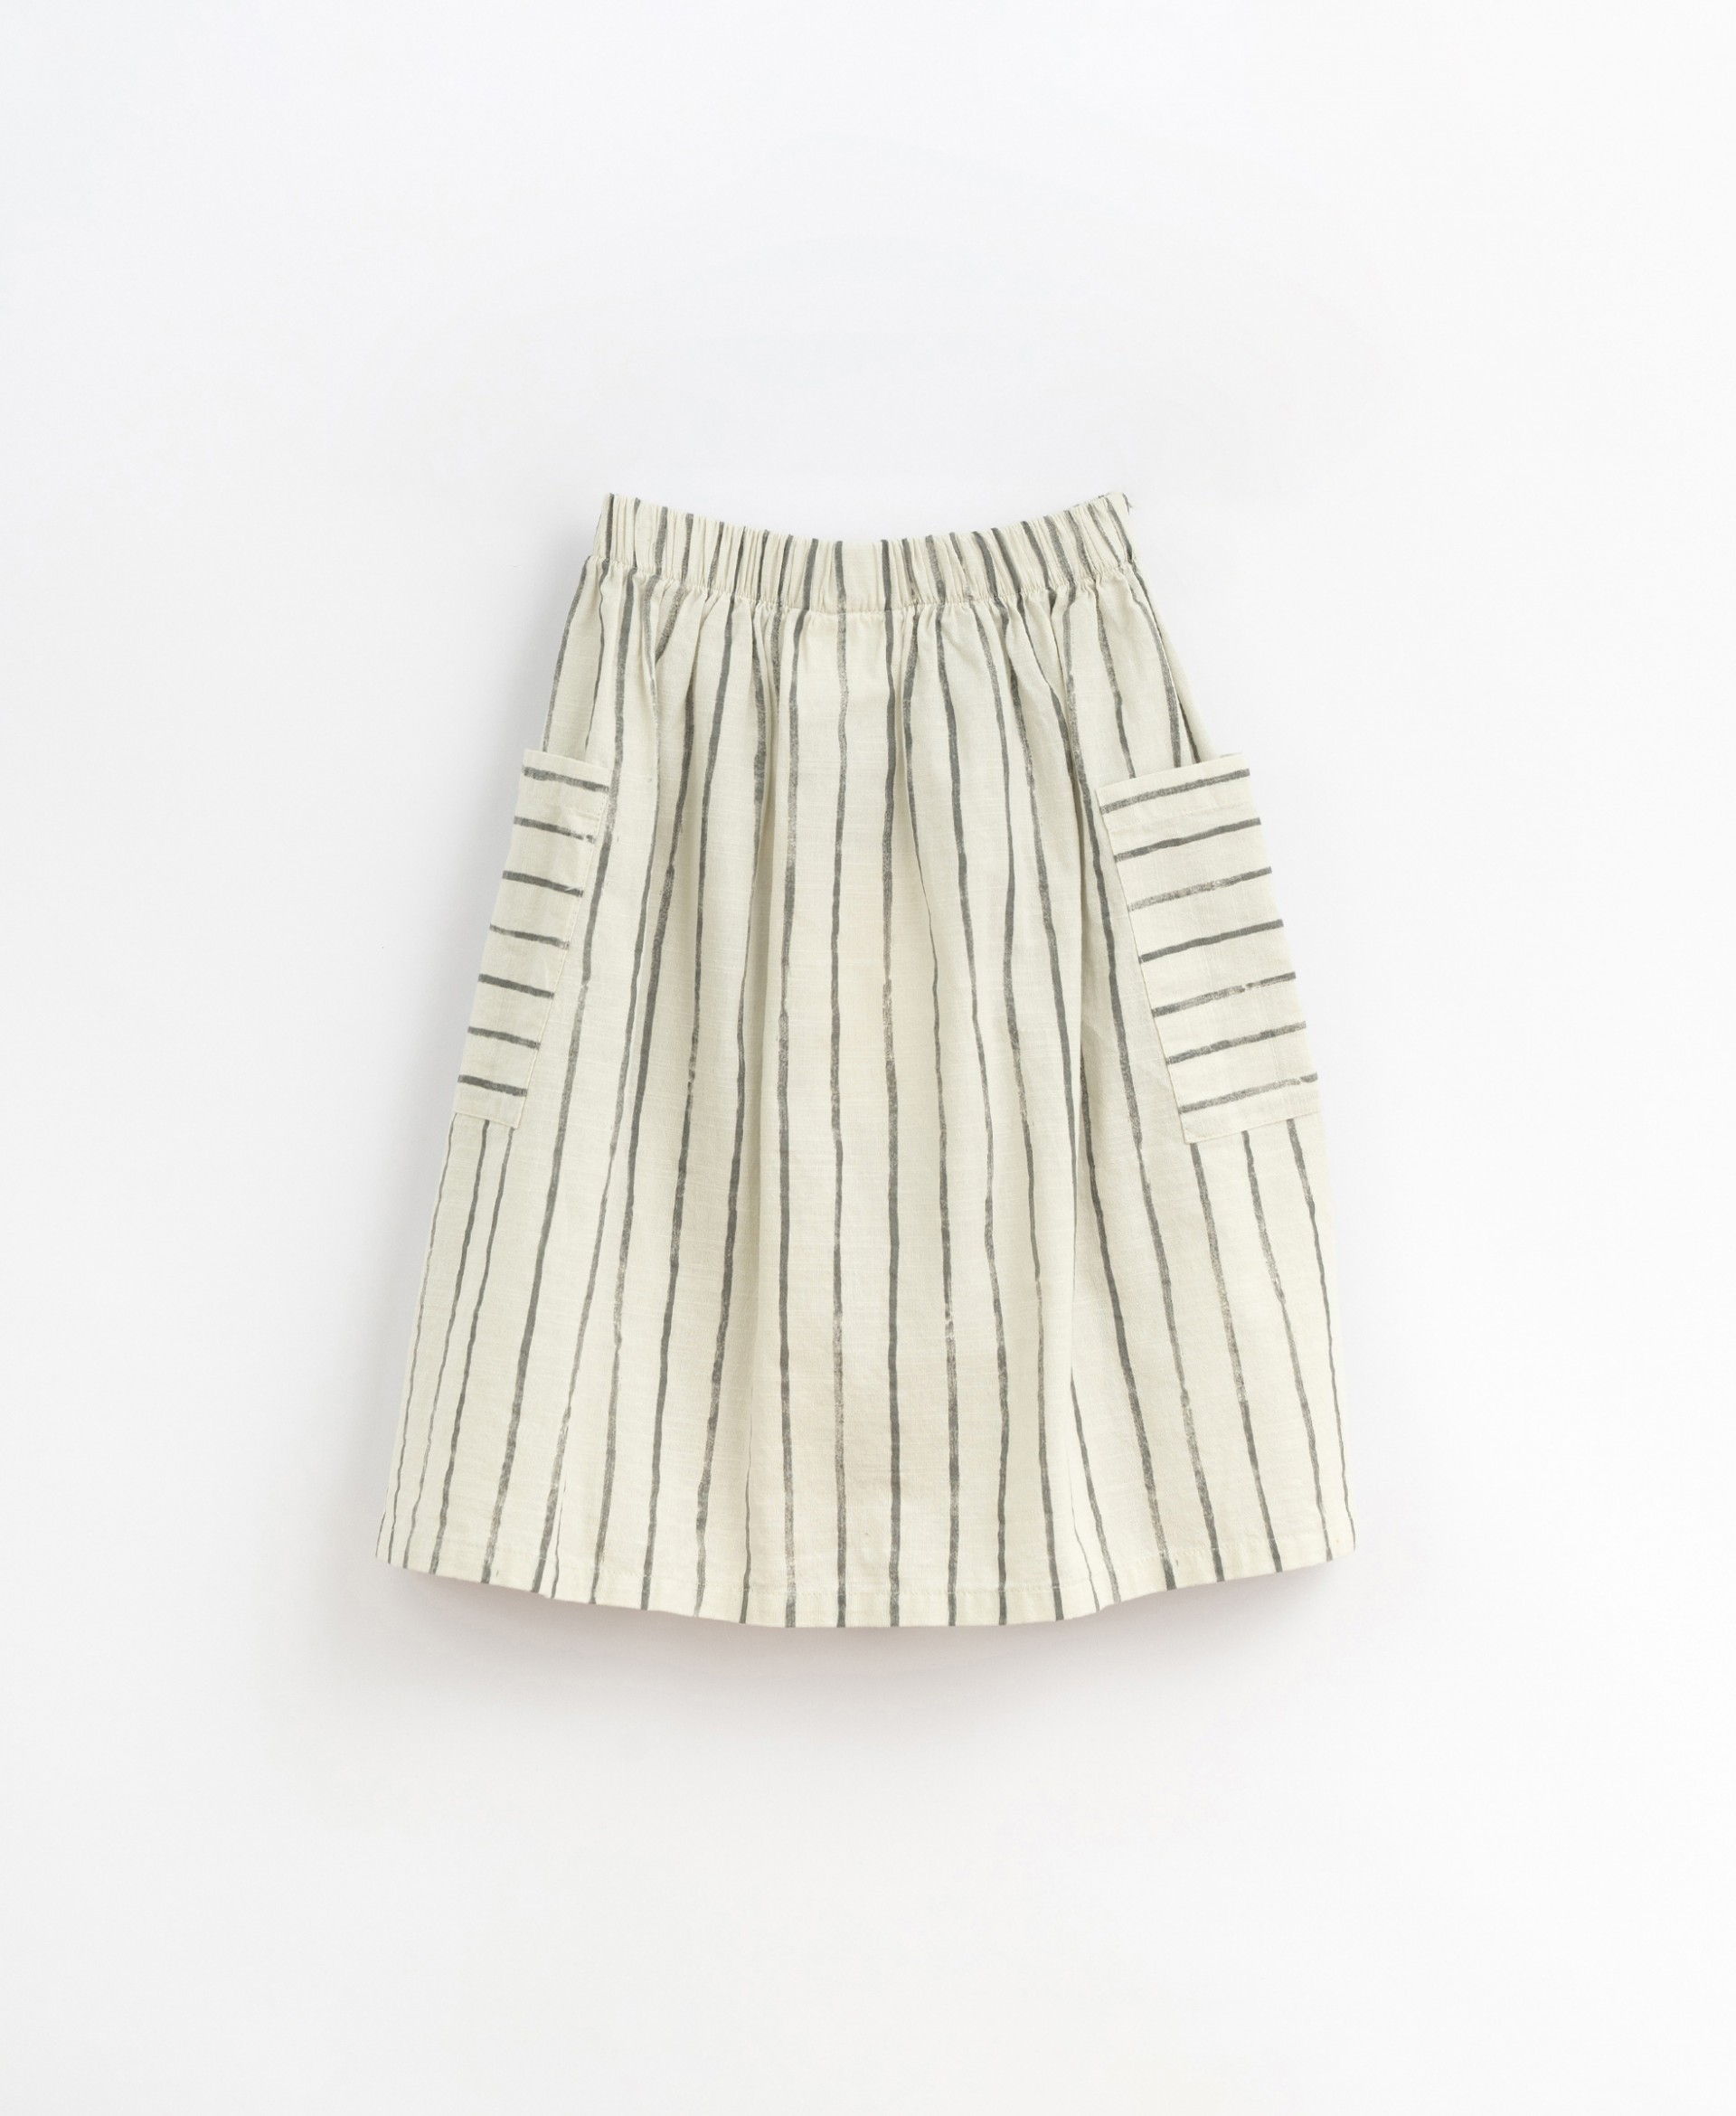 Fabric skirt with side pockets | Basketry